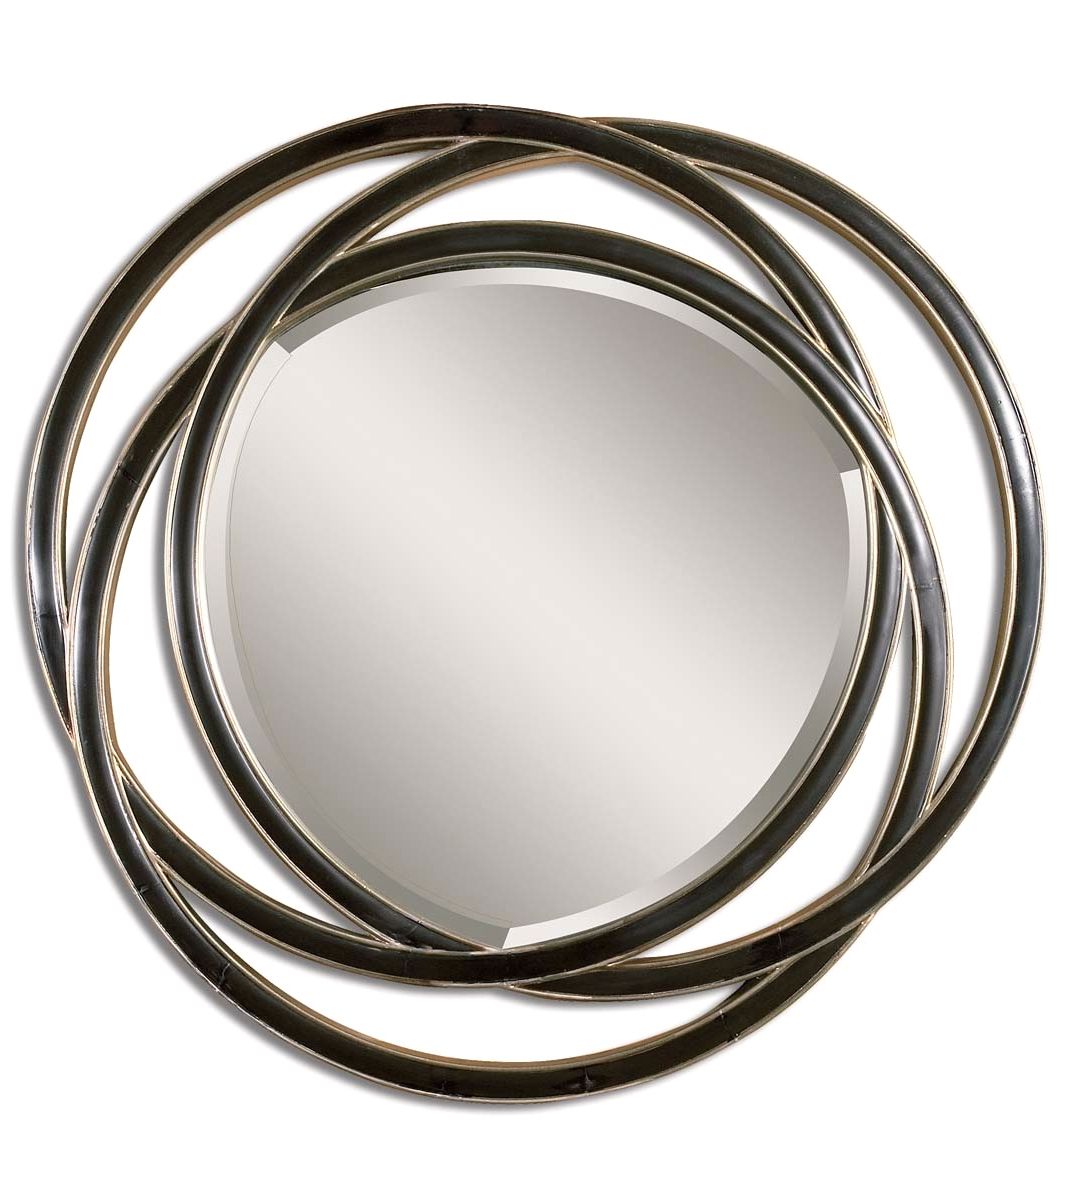 Fashionable Odalis Modern Matte Black Round Mirror With Overlapping Circle Frame Pertaining To Matte Black Led Wall Mirrors (View 13 of 15)